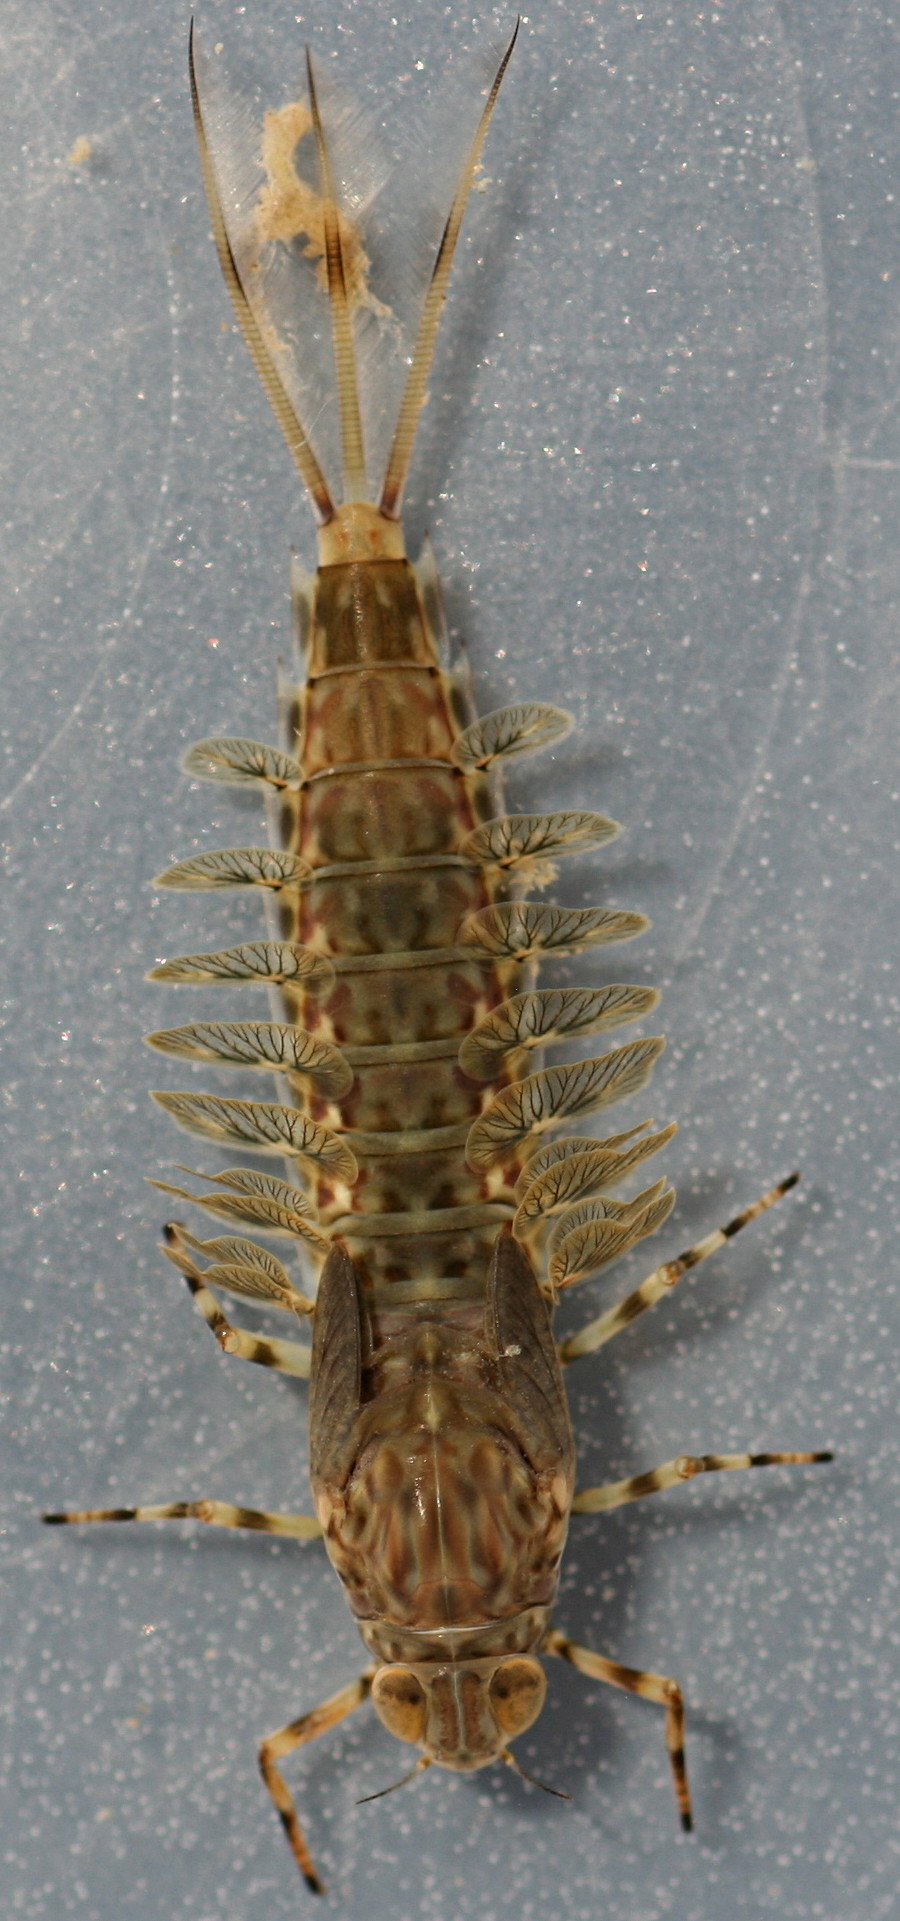 Intermediate nymph. About 15 mm (excluding cerci).